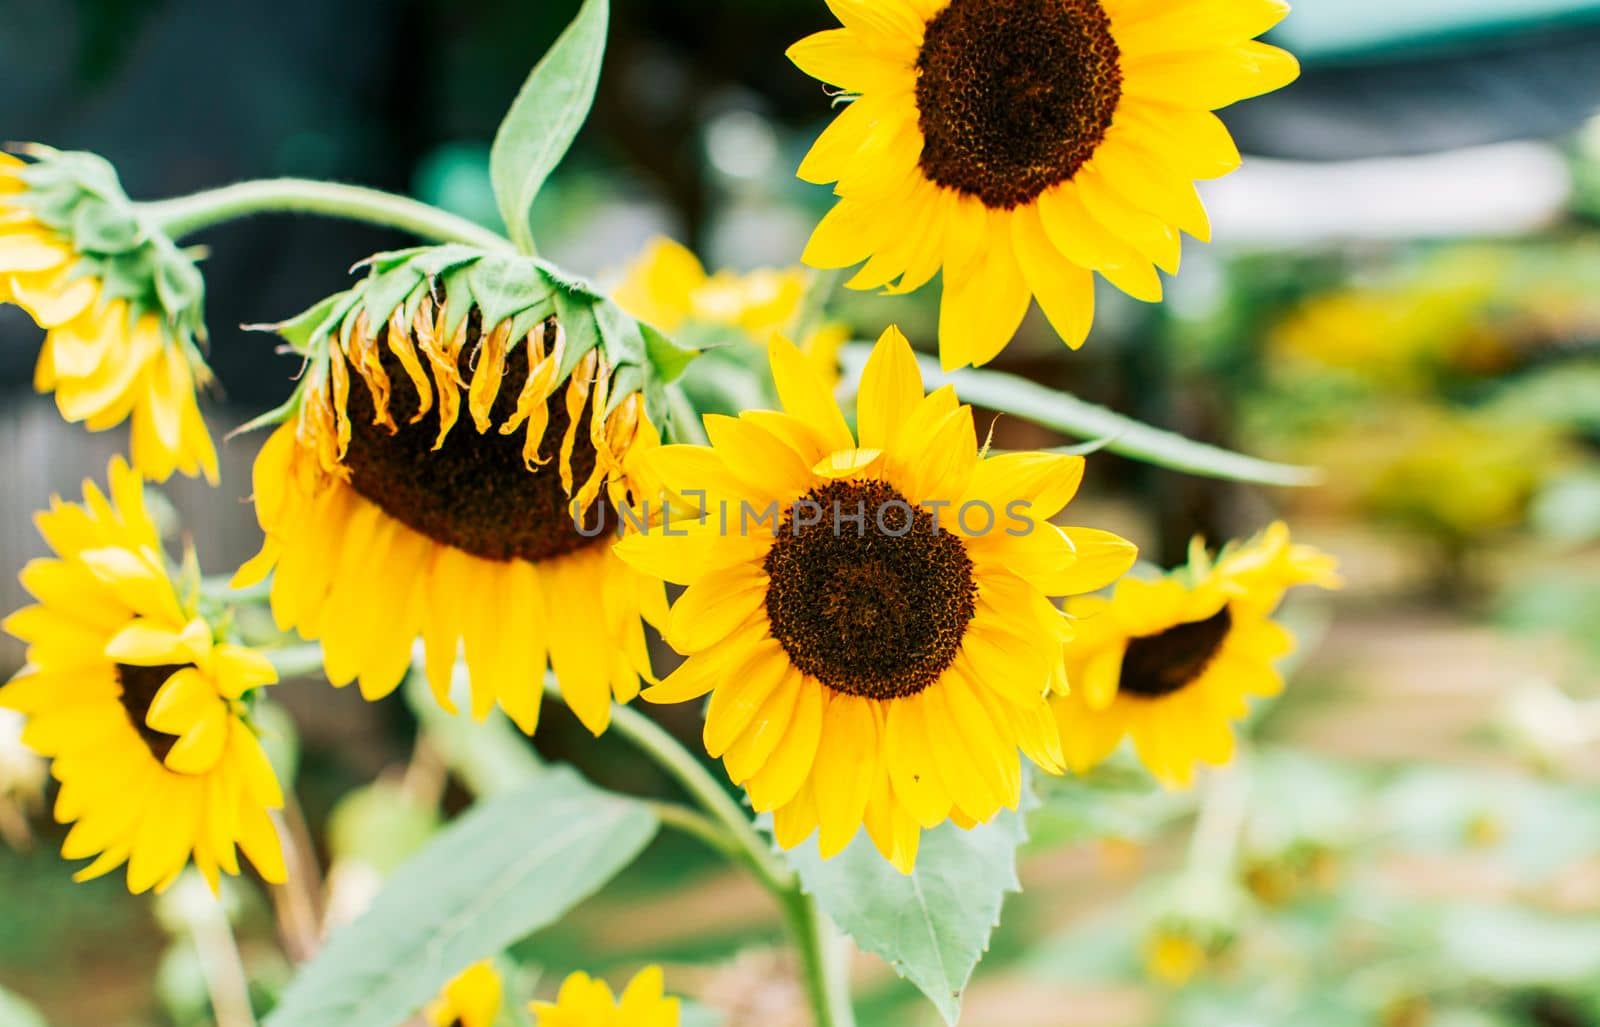 Beautiful sunflowers in a natural garden on a sunny day. Details of sunflowers and petals. Five yellow sunflowers in a garden, Close up of five beautiful sunflowers in a garden at sunset by isaiphoto